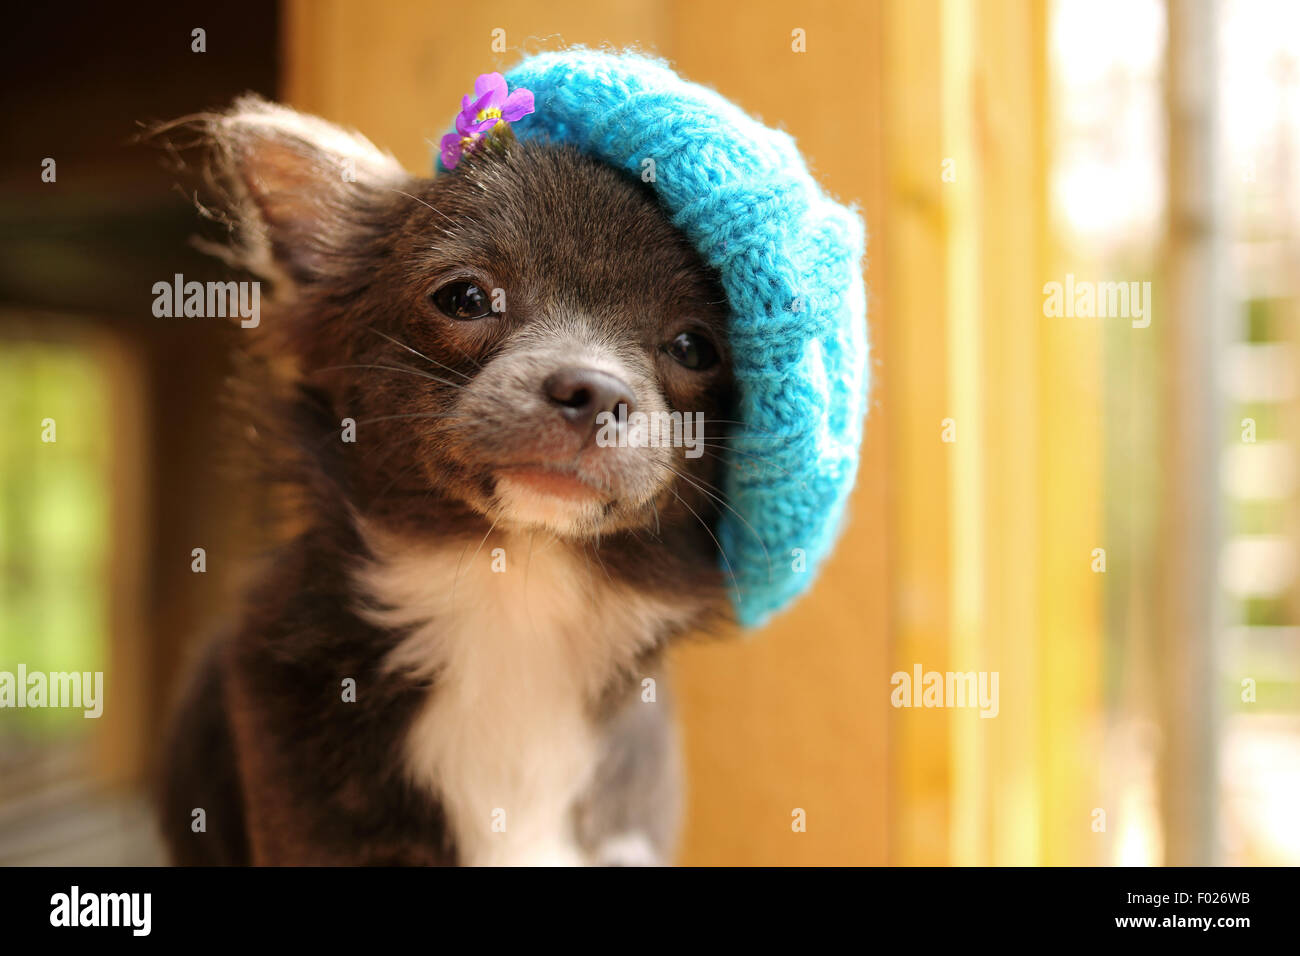 Chihuahua puppy wearing hat tricoté Banque D'Images